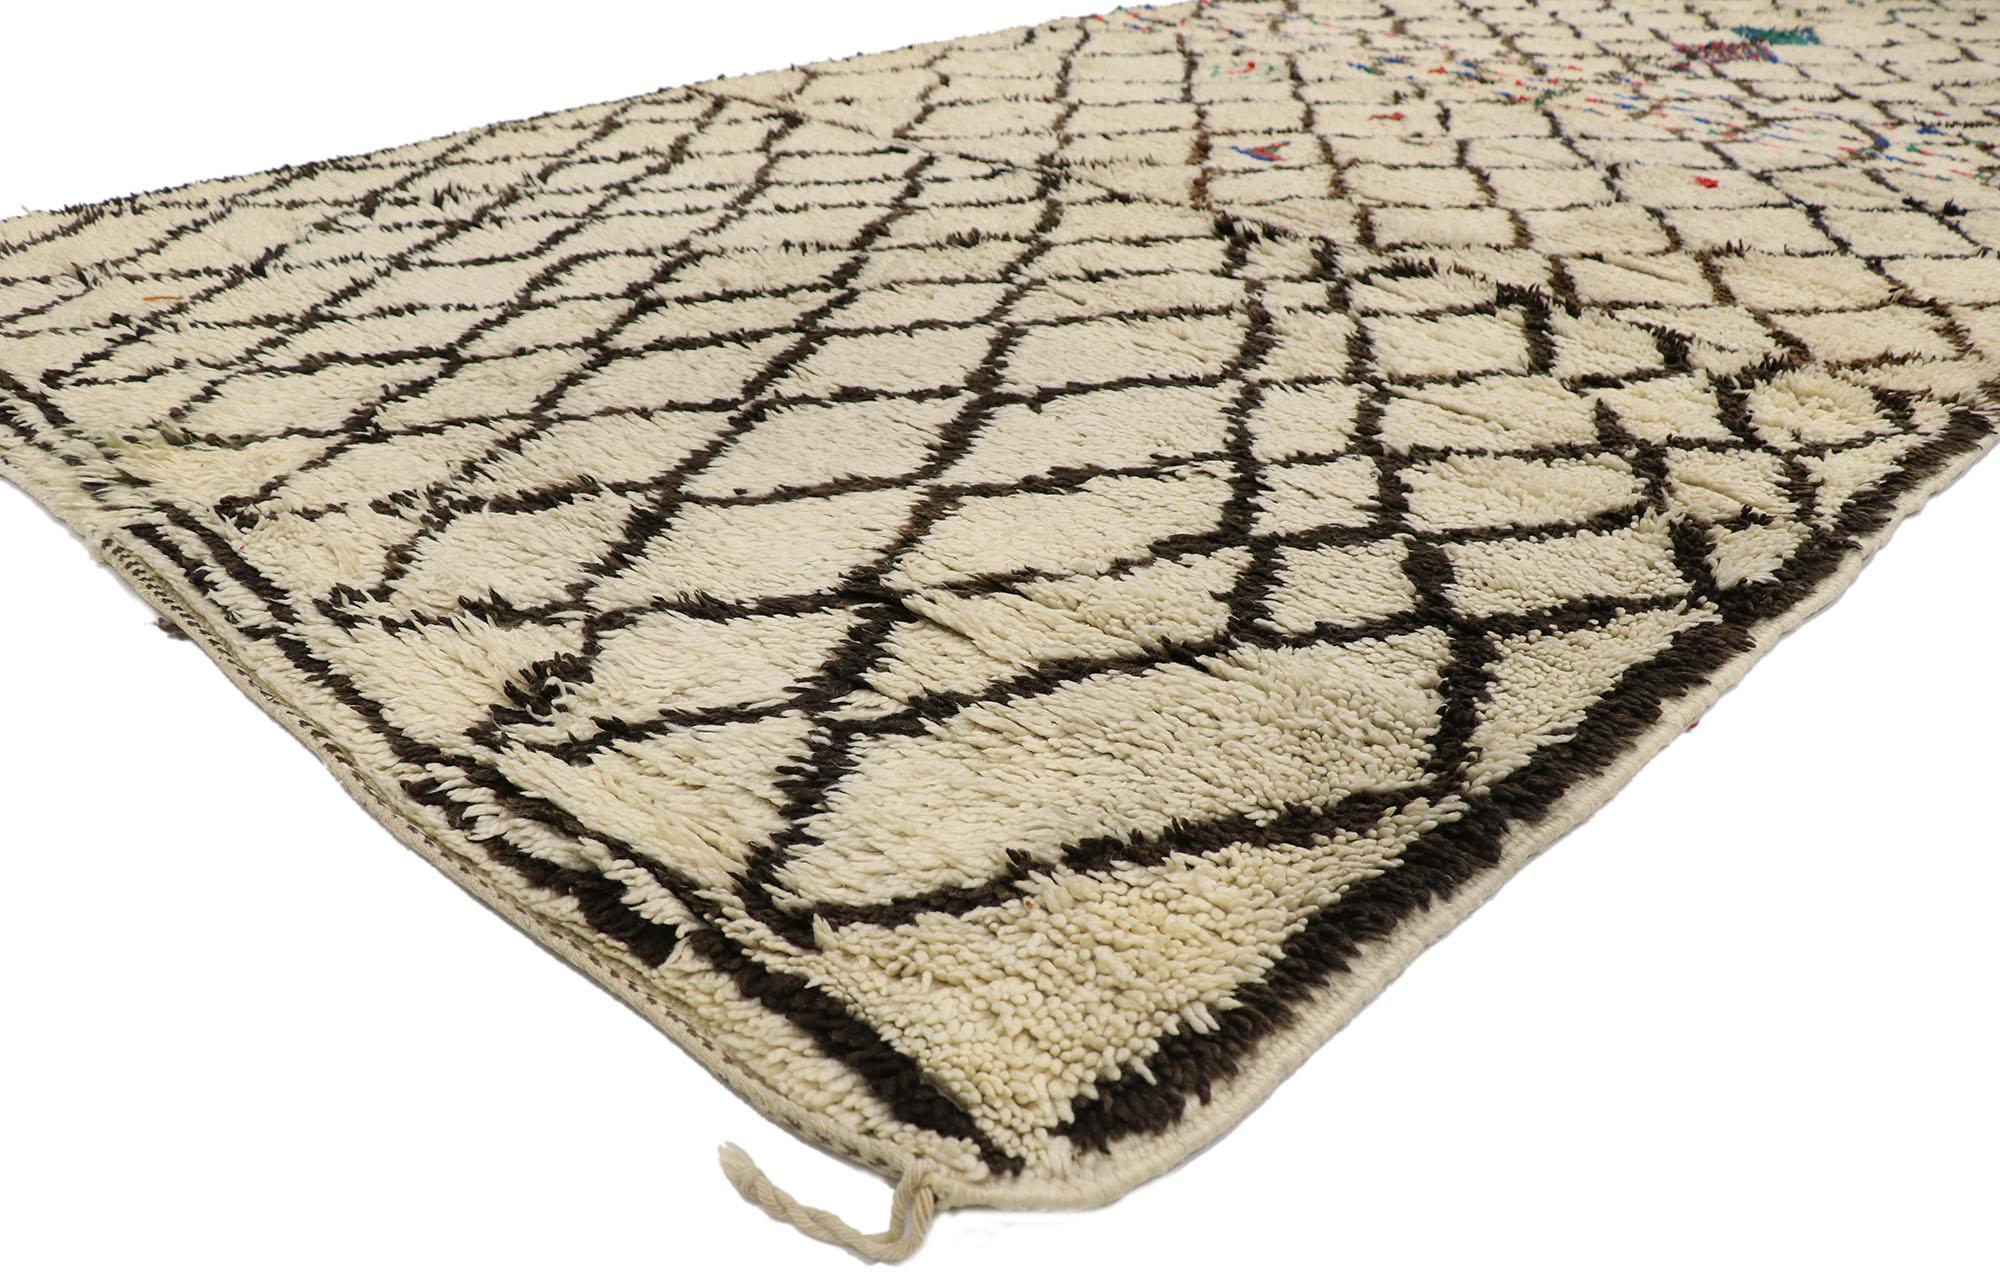 21398 Vintage Berber Moroccan Azilal rug with Tribal Style 06'05 x 14'06. With its simplicity, plush pile and tribal style, this hand knotted wool vintage Berber Moroccan Azilal runner is a captivating vision of woven beauty. It features a diamond